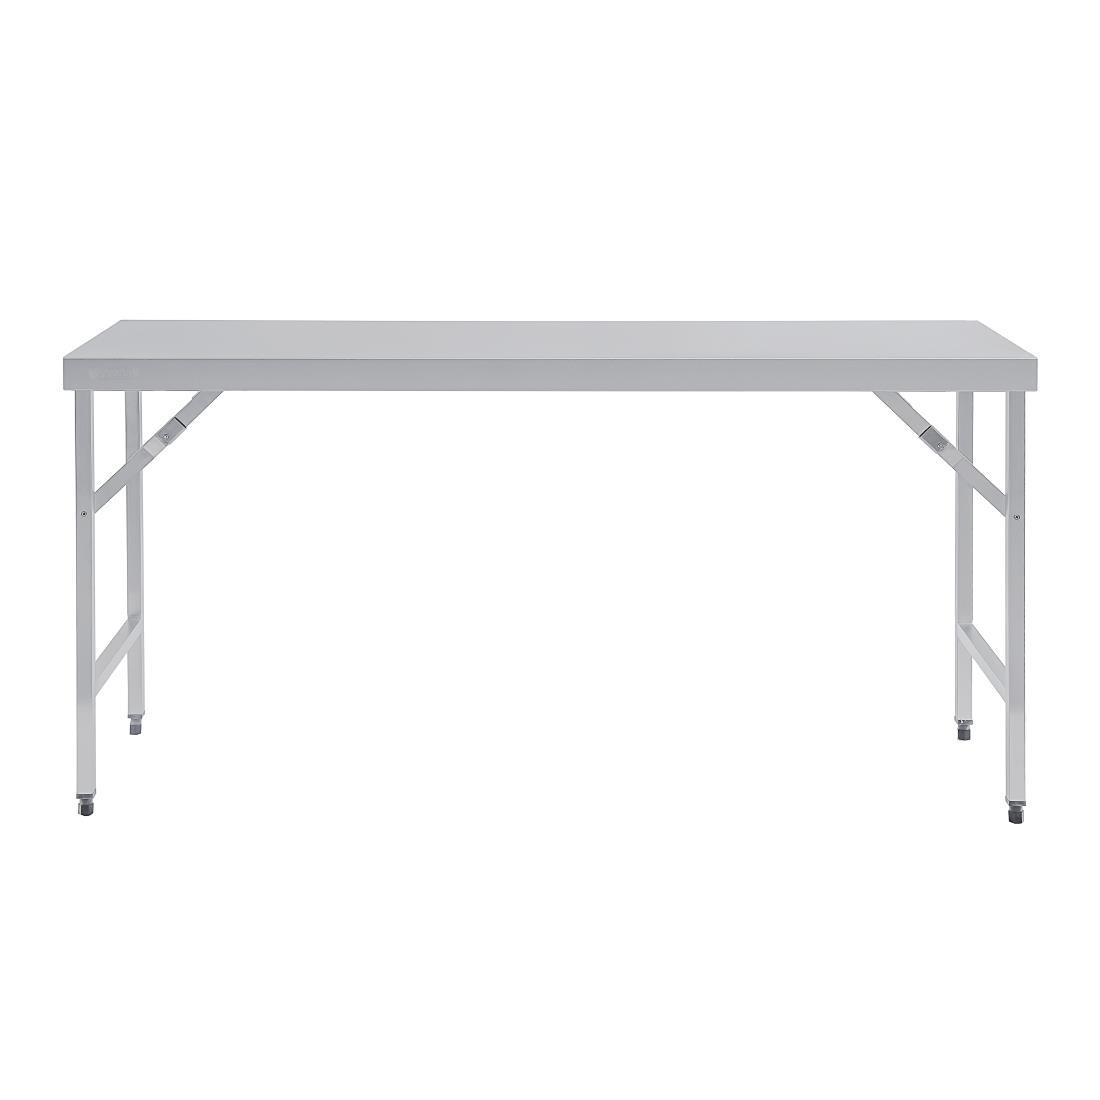 Vogue Stainless Steel Folding Table 1800mm - CB906  - 2